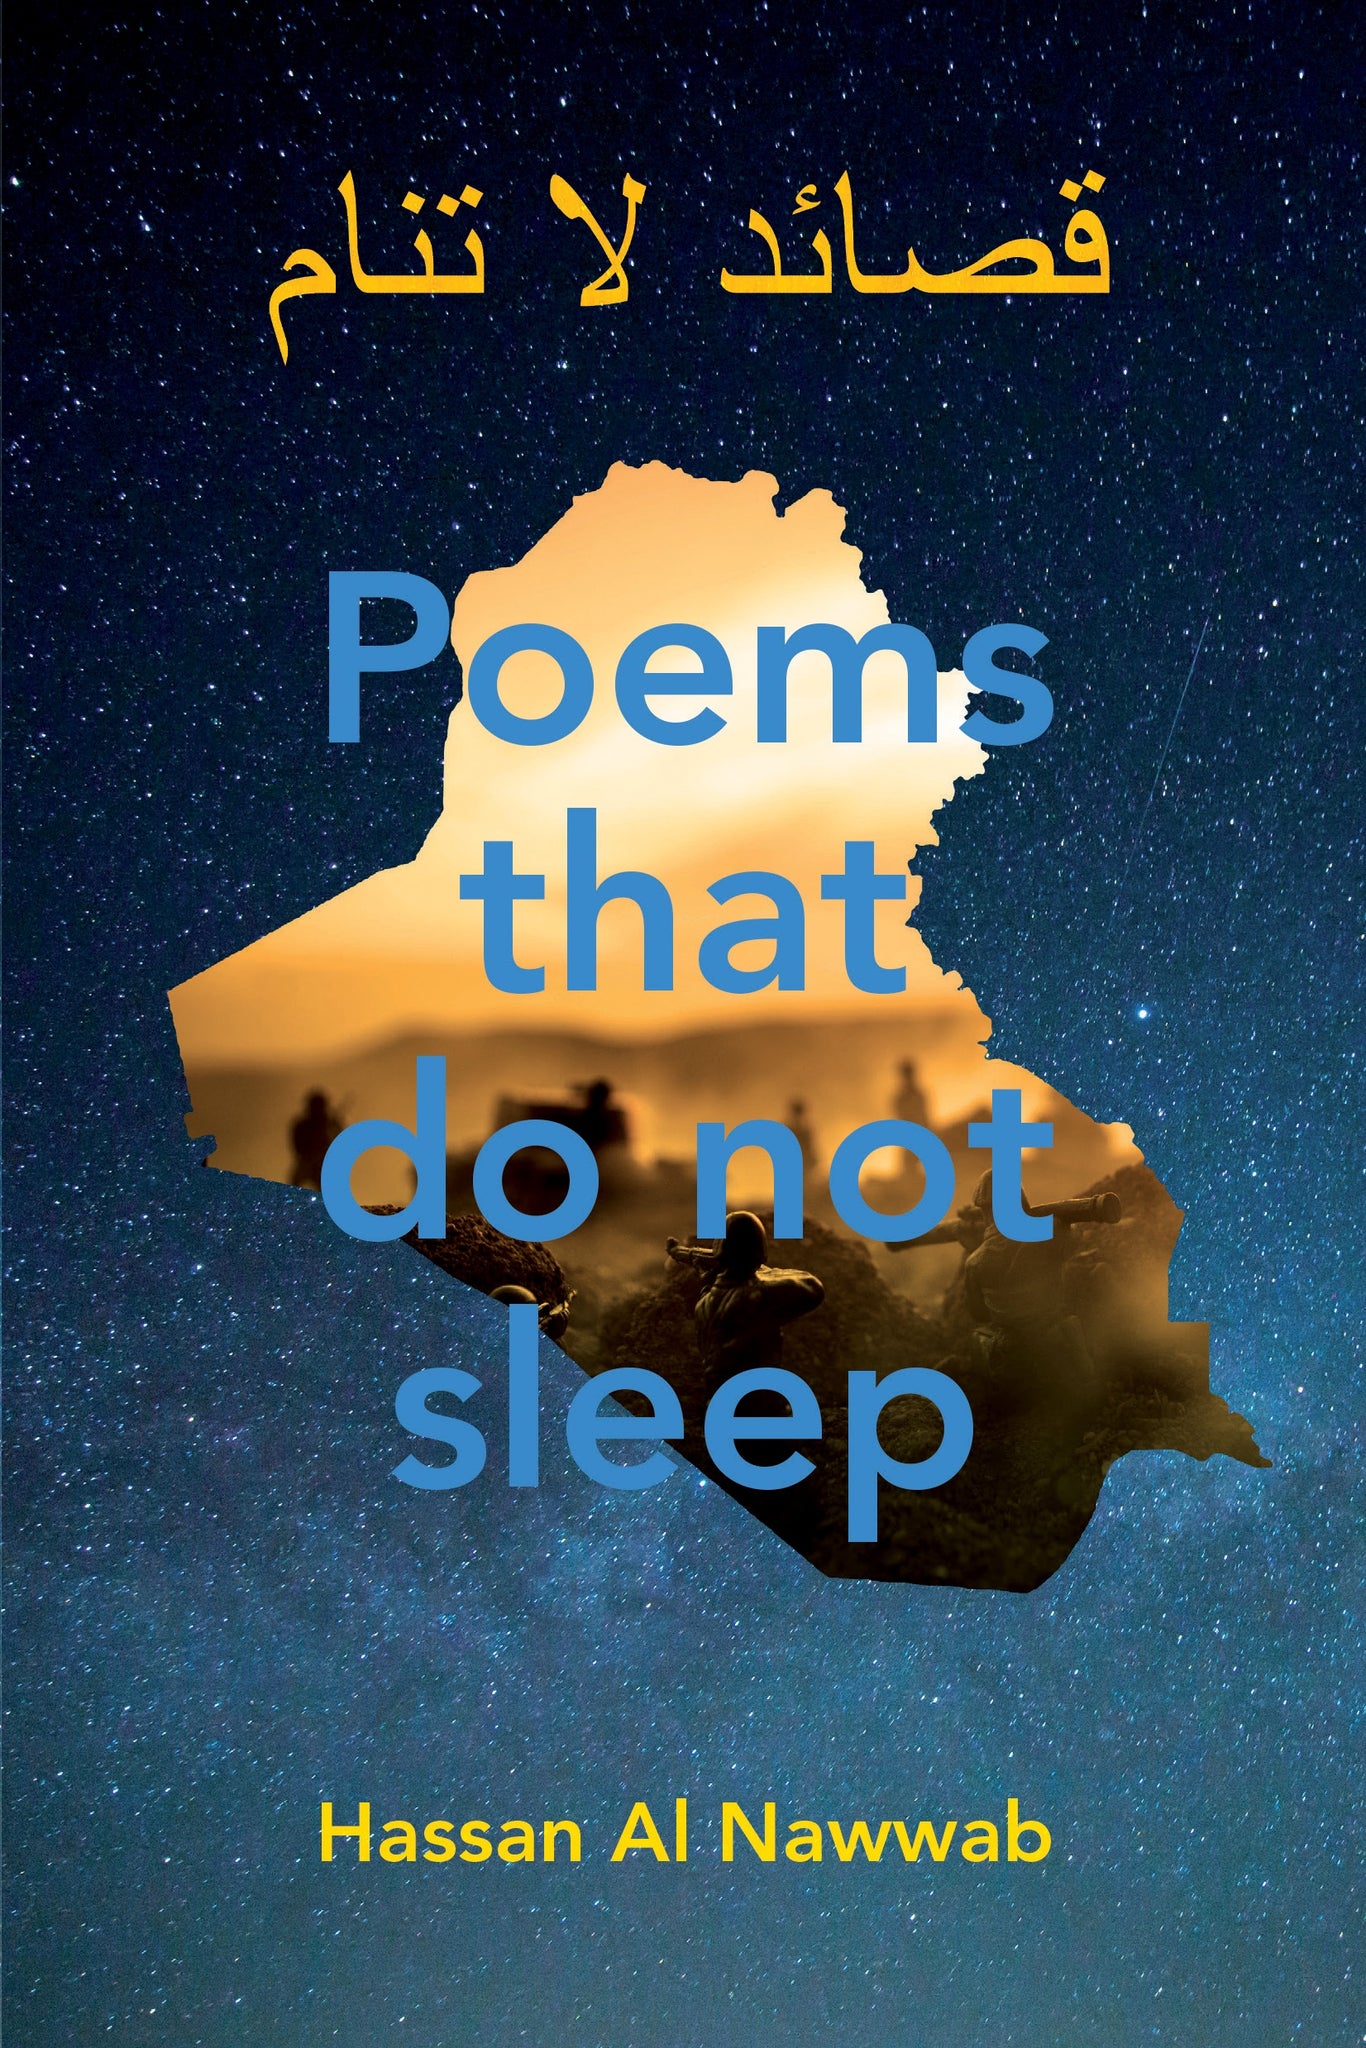 Hassan Al Nawwab - Poems that Do Not Sleep - Softcover book (m/fac033)